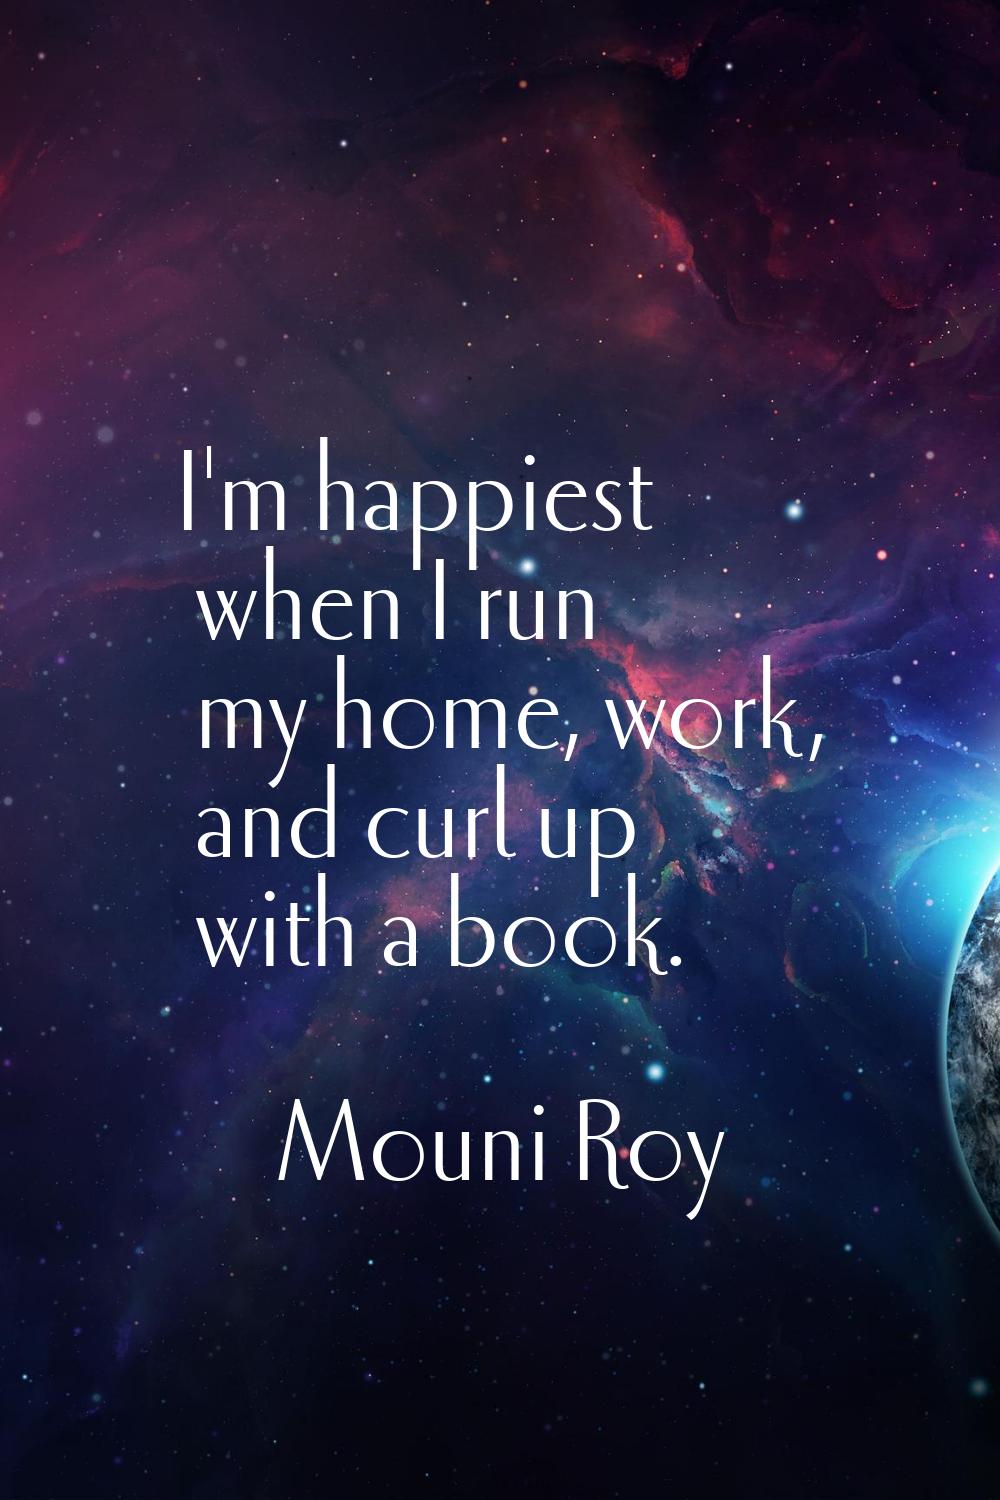 I'm happiest when I run my home, work, and curl up with a book.